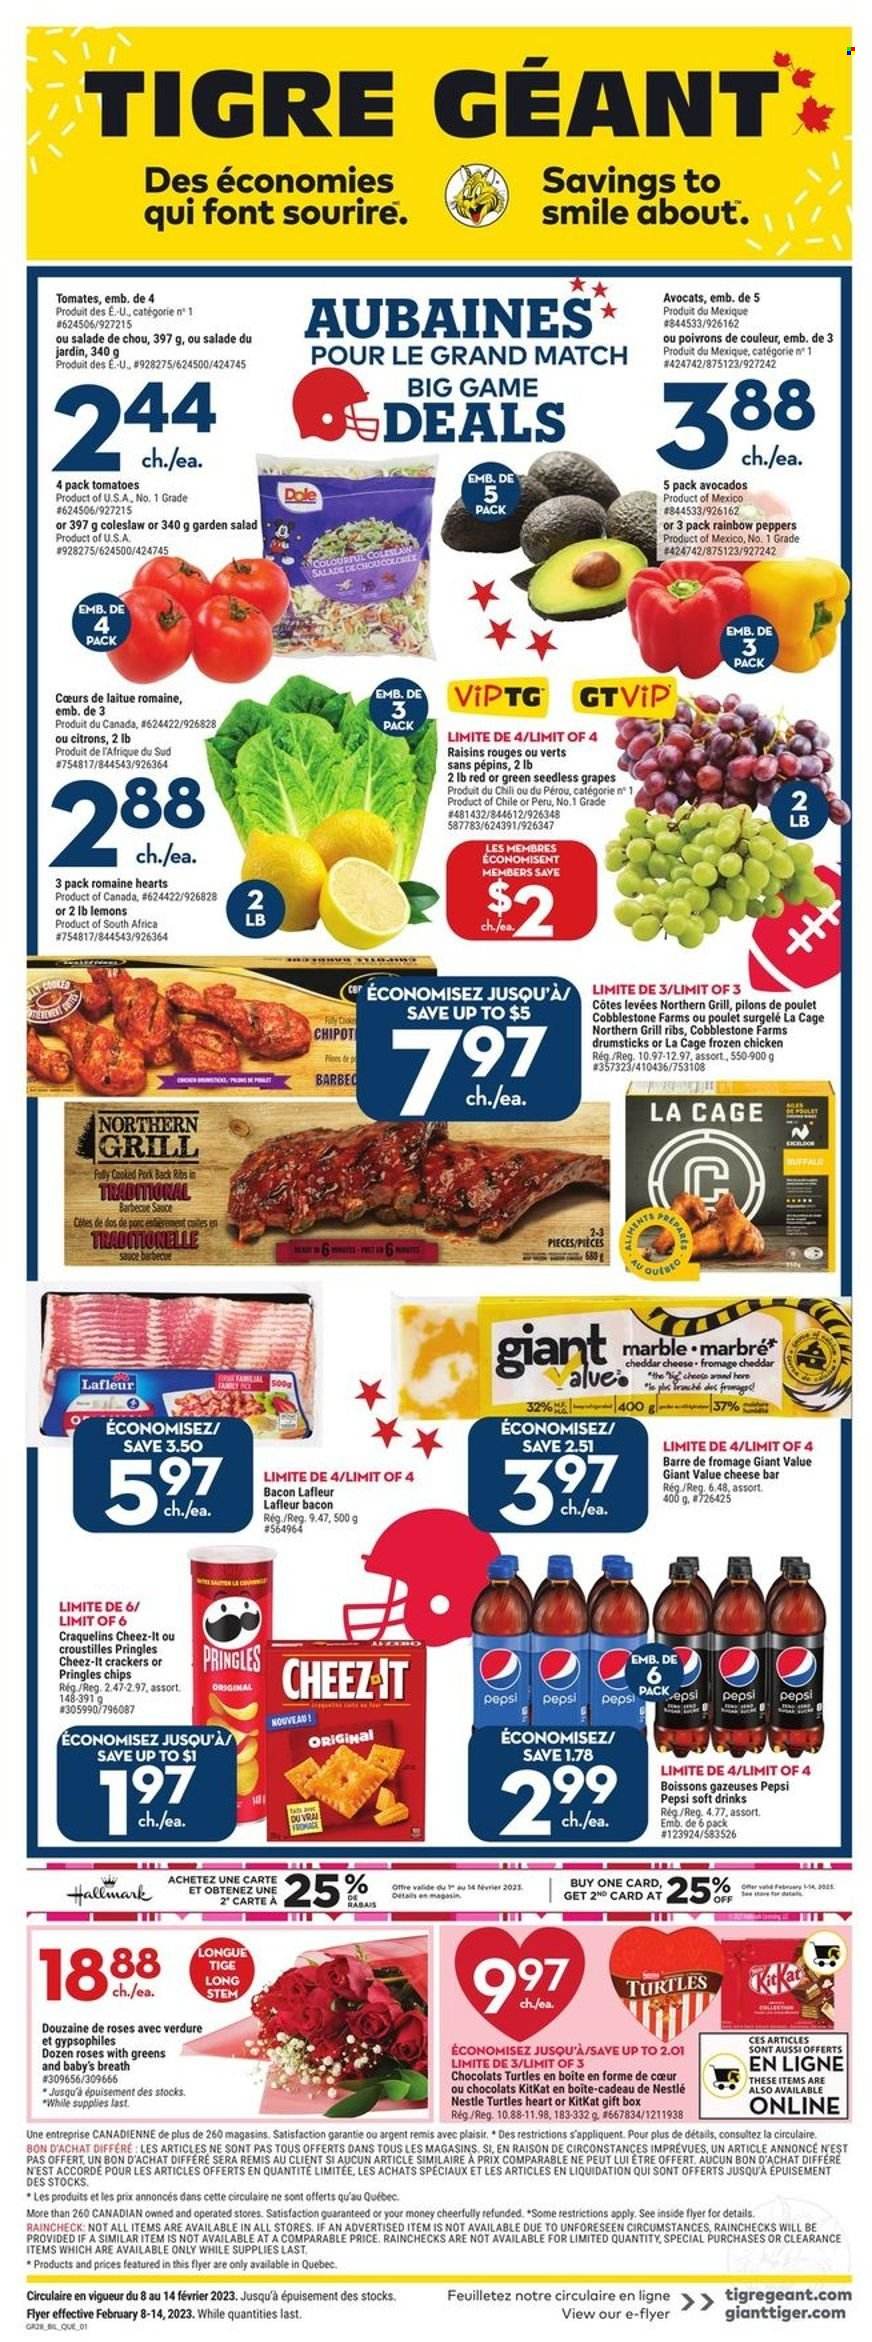 thumbnail - Giant Tiger Flyer - February 08, 2023 - February 14, 2023 - Sales products - tomatoes, salad, Dole, peppers, avocado, grapes, seedless grapes, lemons, coleslaw, sauce, bacon, KitKat, crackers, Pringles, Cheez-It, BBQ sauce, dried fruit, Pepsi, soft drink, chicken, ribs, pork meat, pork ribs, pork back ribs, gift box, turtles, cage, rose, Nestlé, raisins. Page 1.